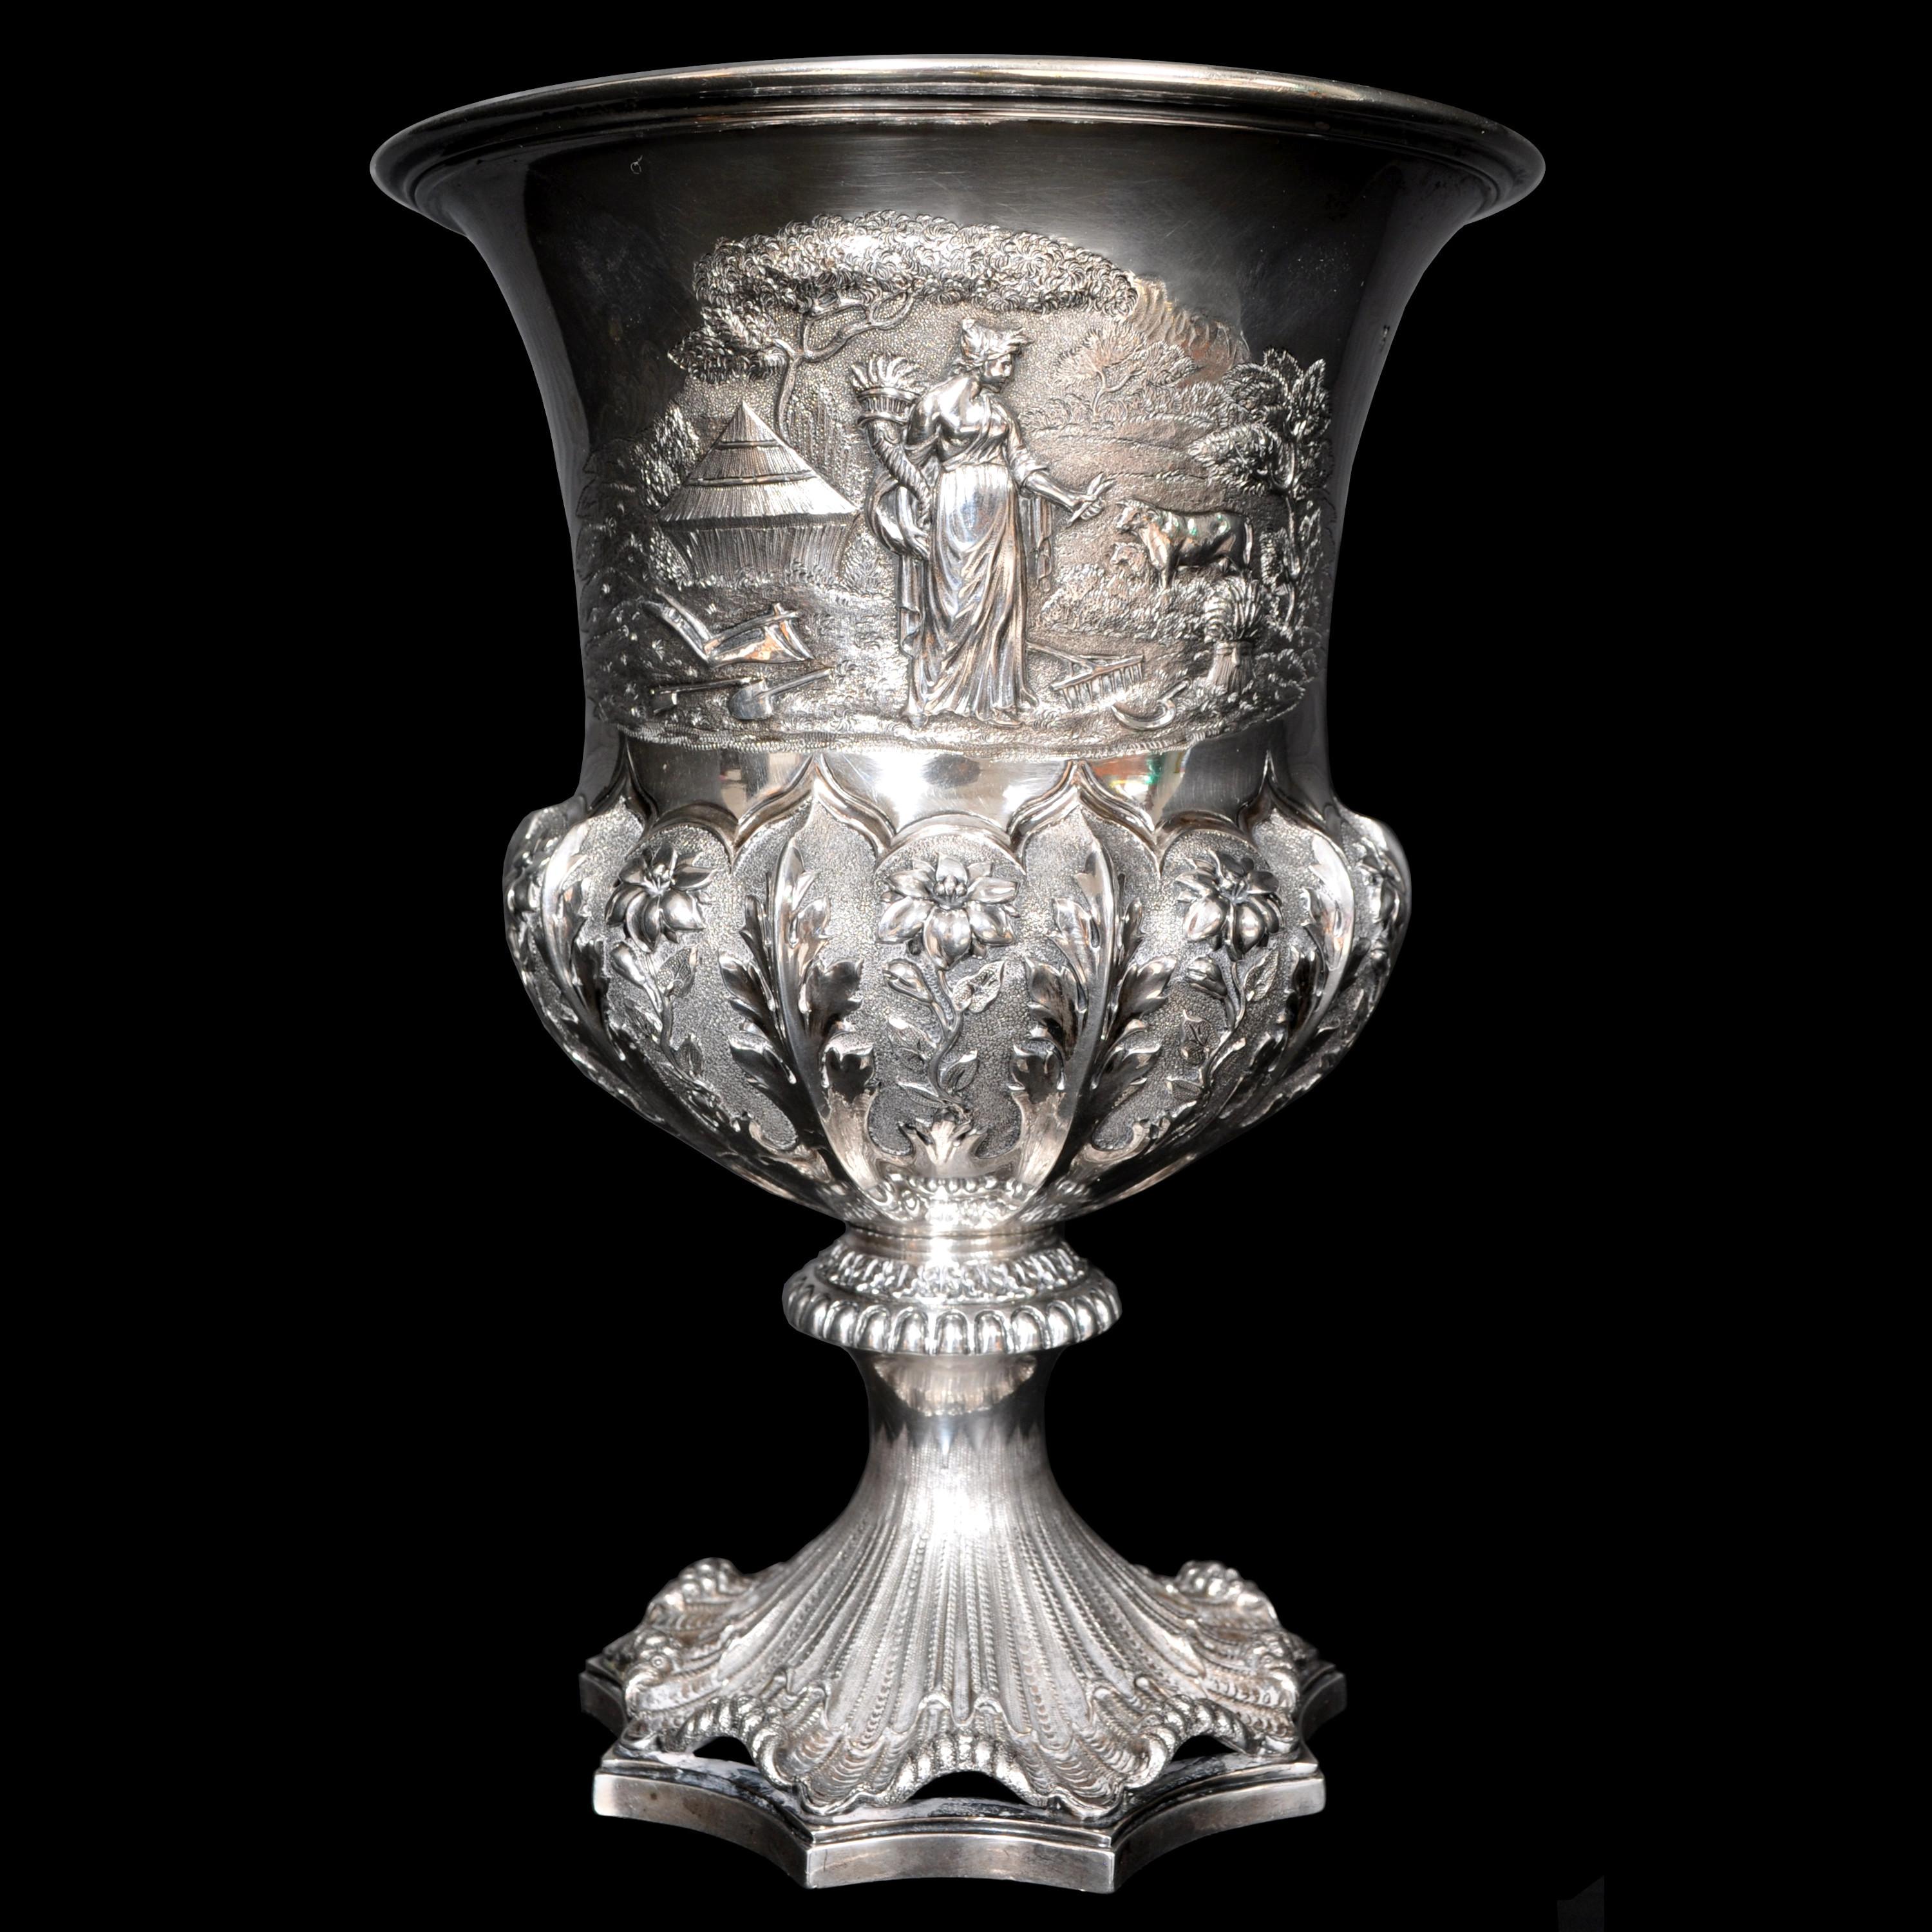 An important silver and silver gilt engraved and repousse work presentation cup, by London maker's Edward, Edward Jr, John and William Barnard, dated 1831.
An exquisite presentation cup having a flared mouth, the front of the cup decorated with a